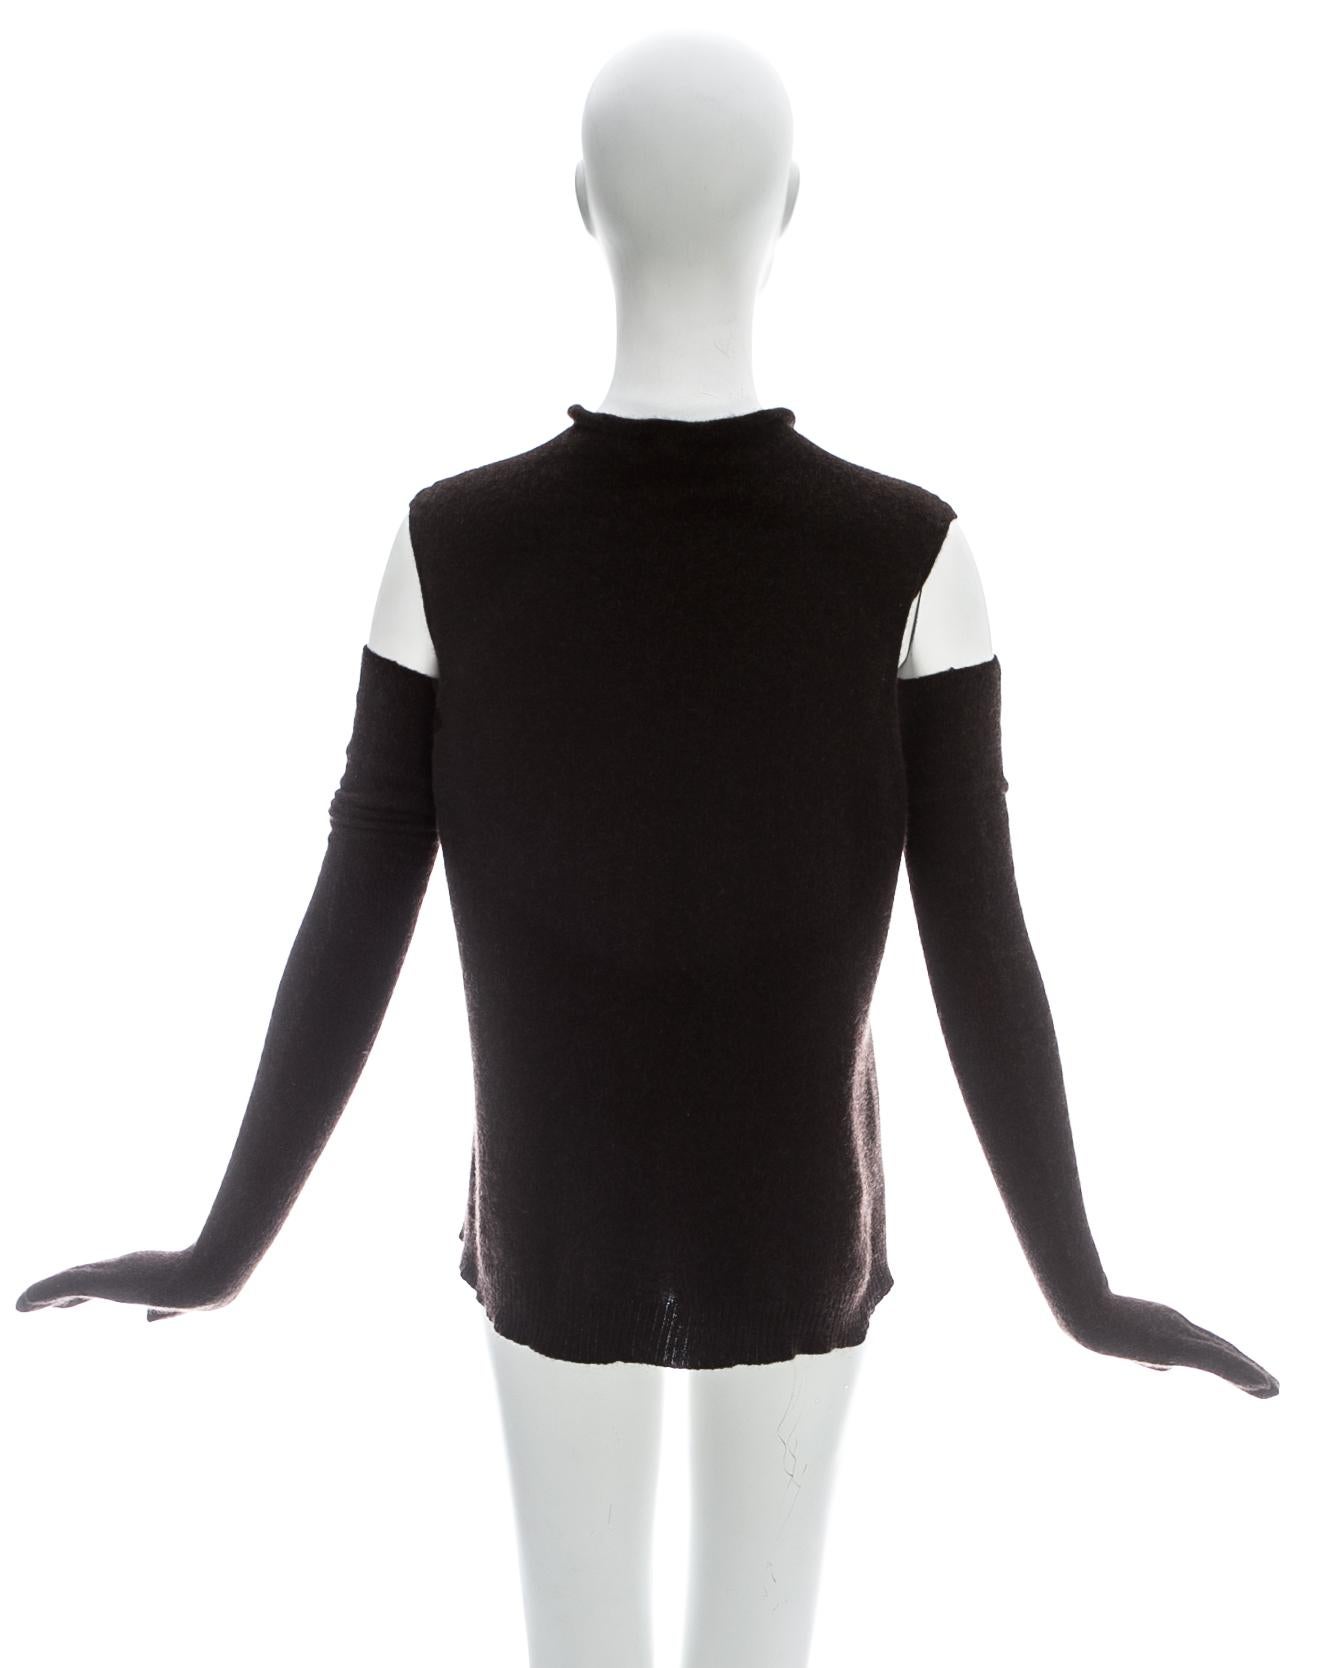 Hermes by Martin Margiela brown cashmere sweater vest and long gloves, ca. 2002 In Good Condition For Sale In London, London